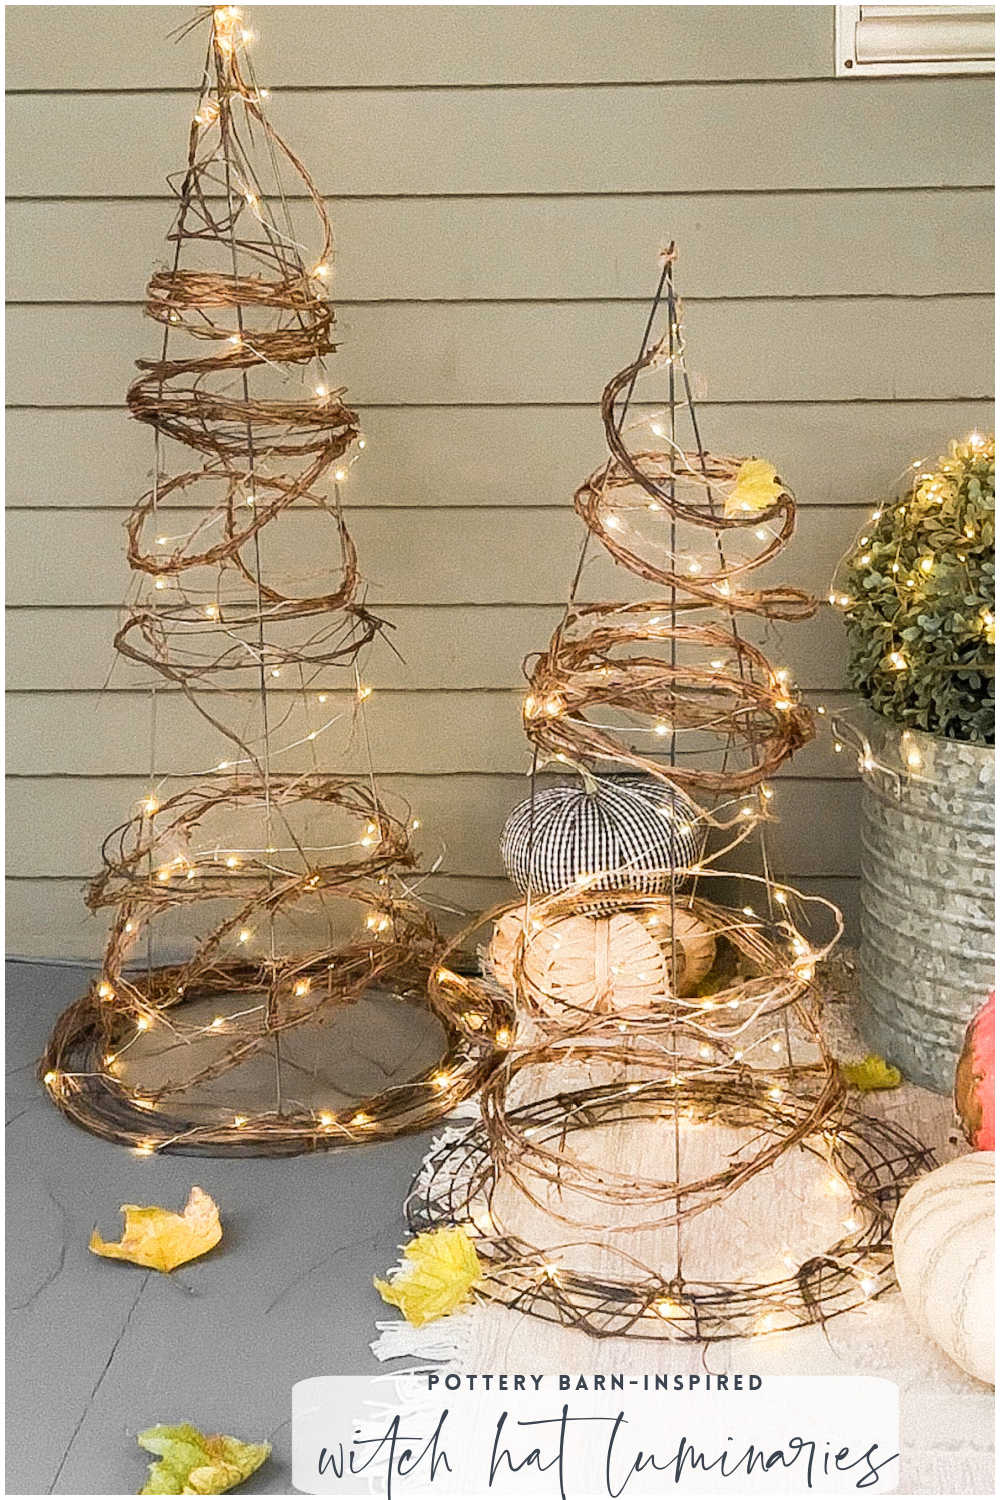 DIY Pottery Barn-Inspired Witches Hat Luminaries. Create these sculptural natural illuminated witches hats for your front porch, stair landing or beside a garden gate!